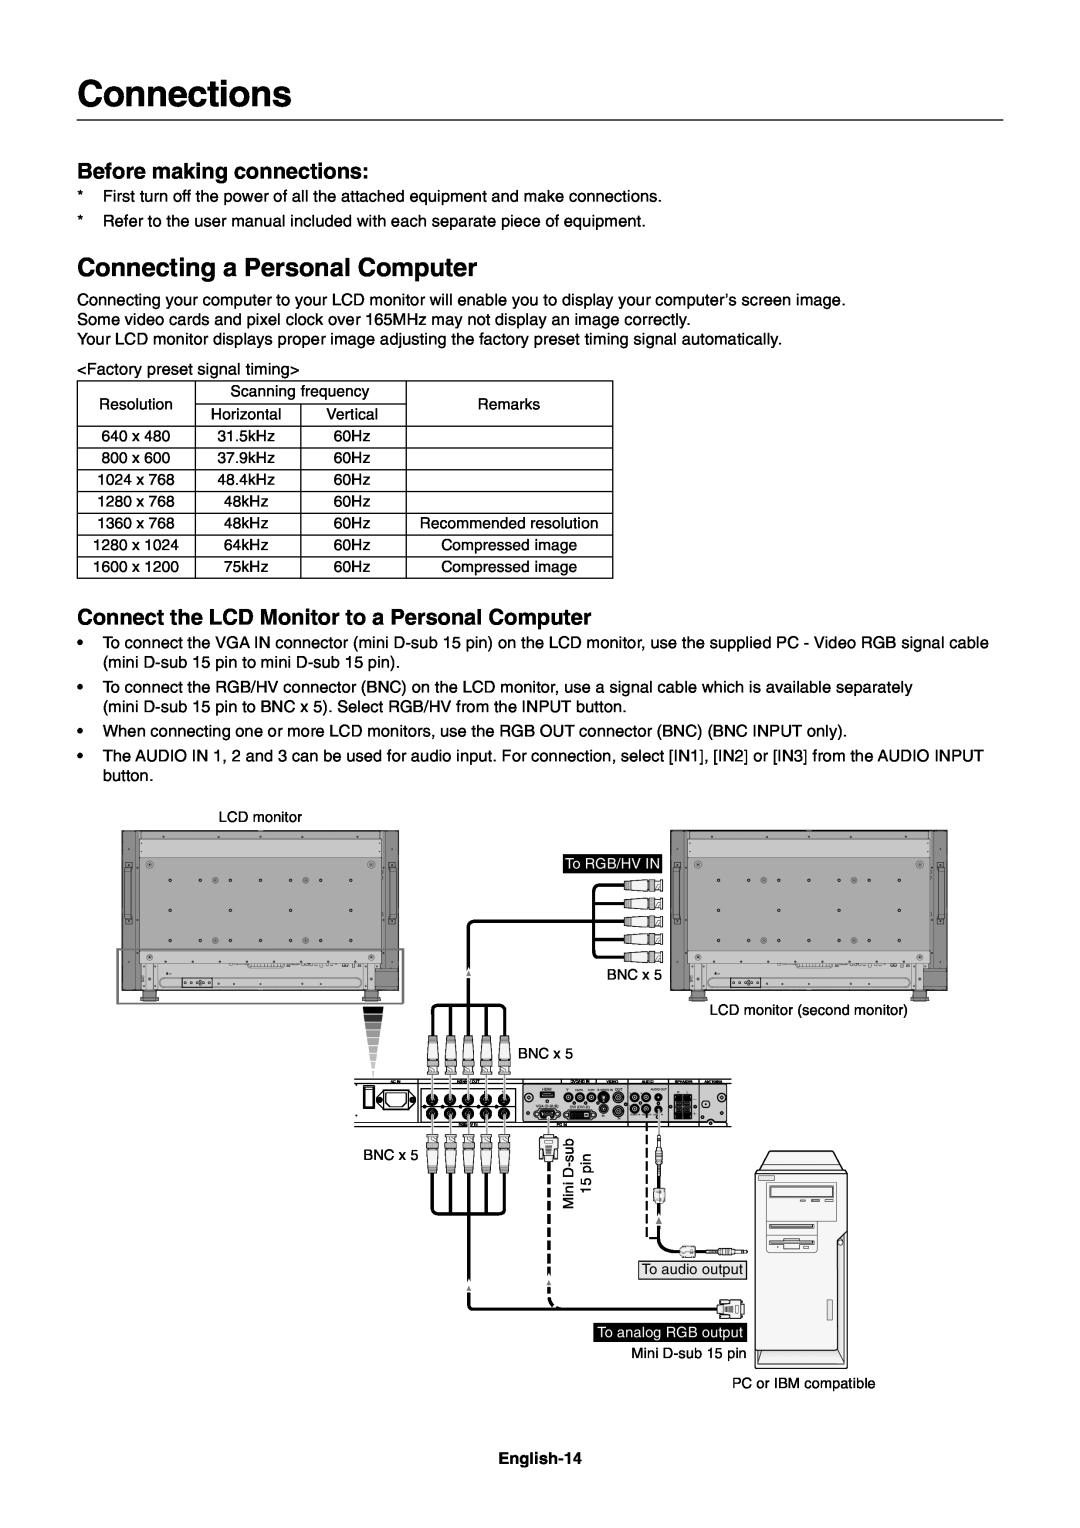 NEC LCD4020, LCD4620 user manual Connections, Connecting a Personal Computer, Before making connections 